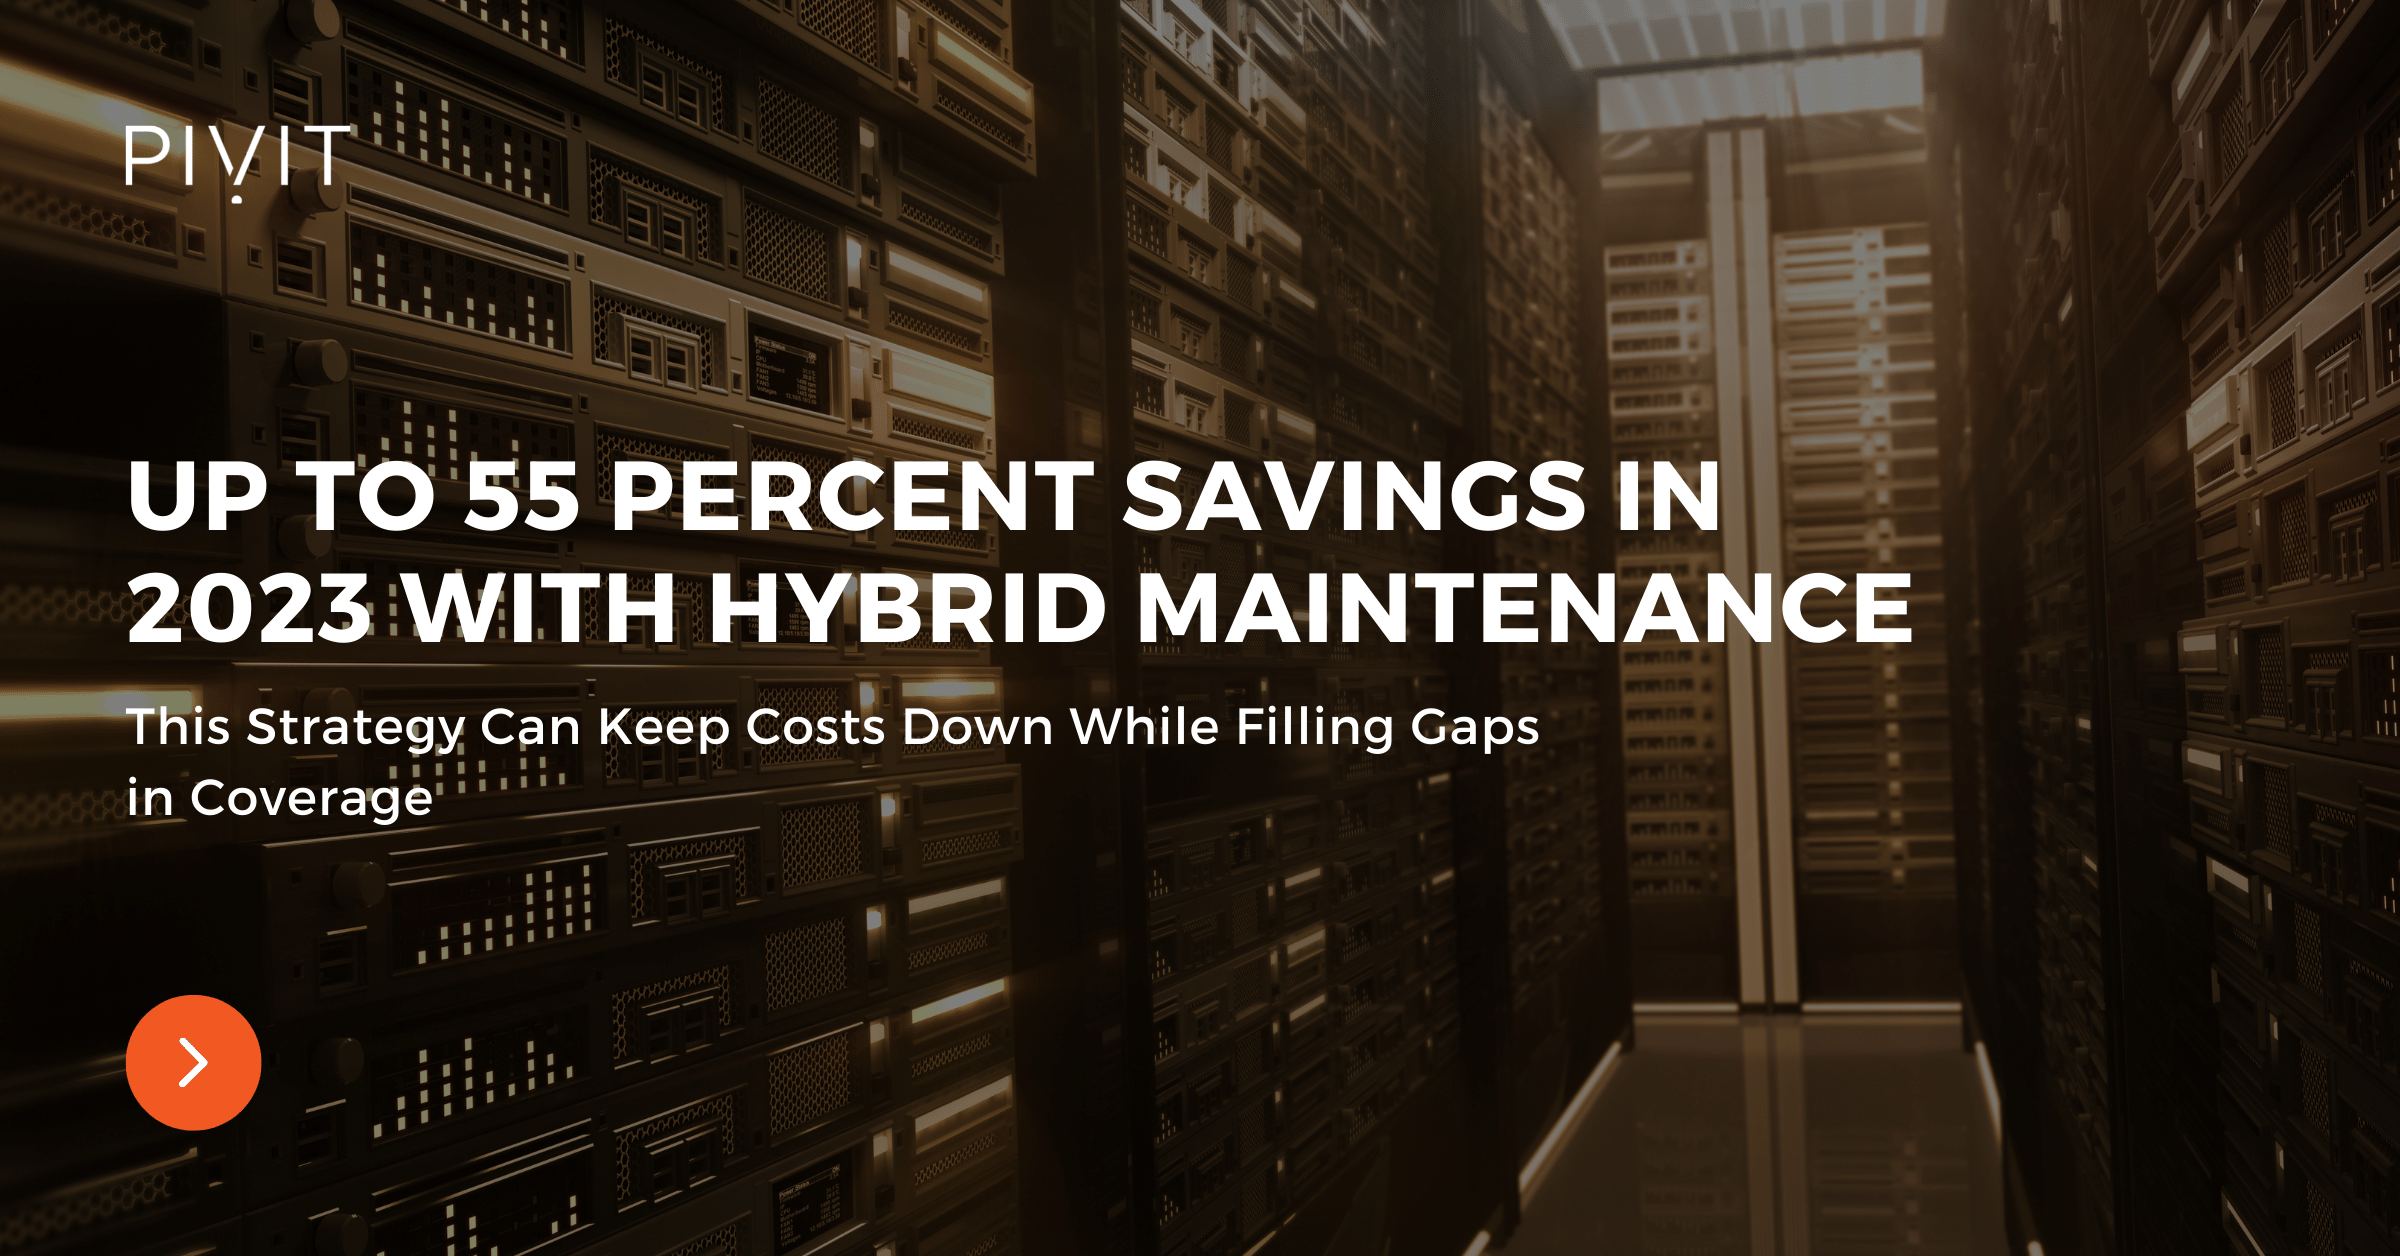 Up to 55% Savings in 2023 With Hybrid Maintenance - This Strategy Can Keep Costs Down While Filling Gaps in Coverage